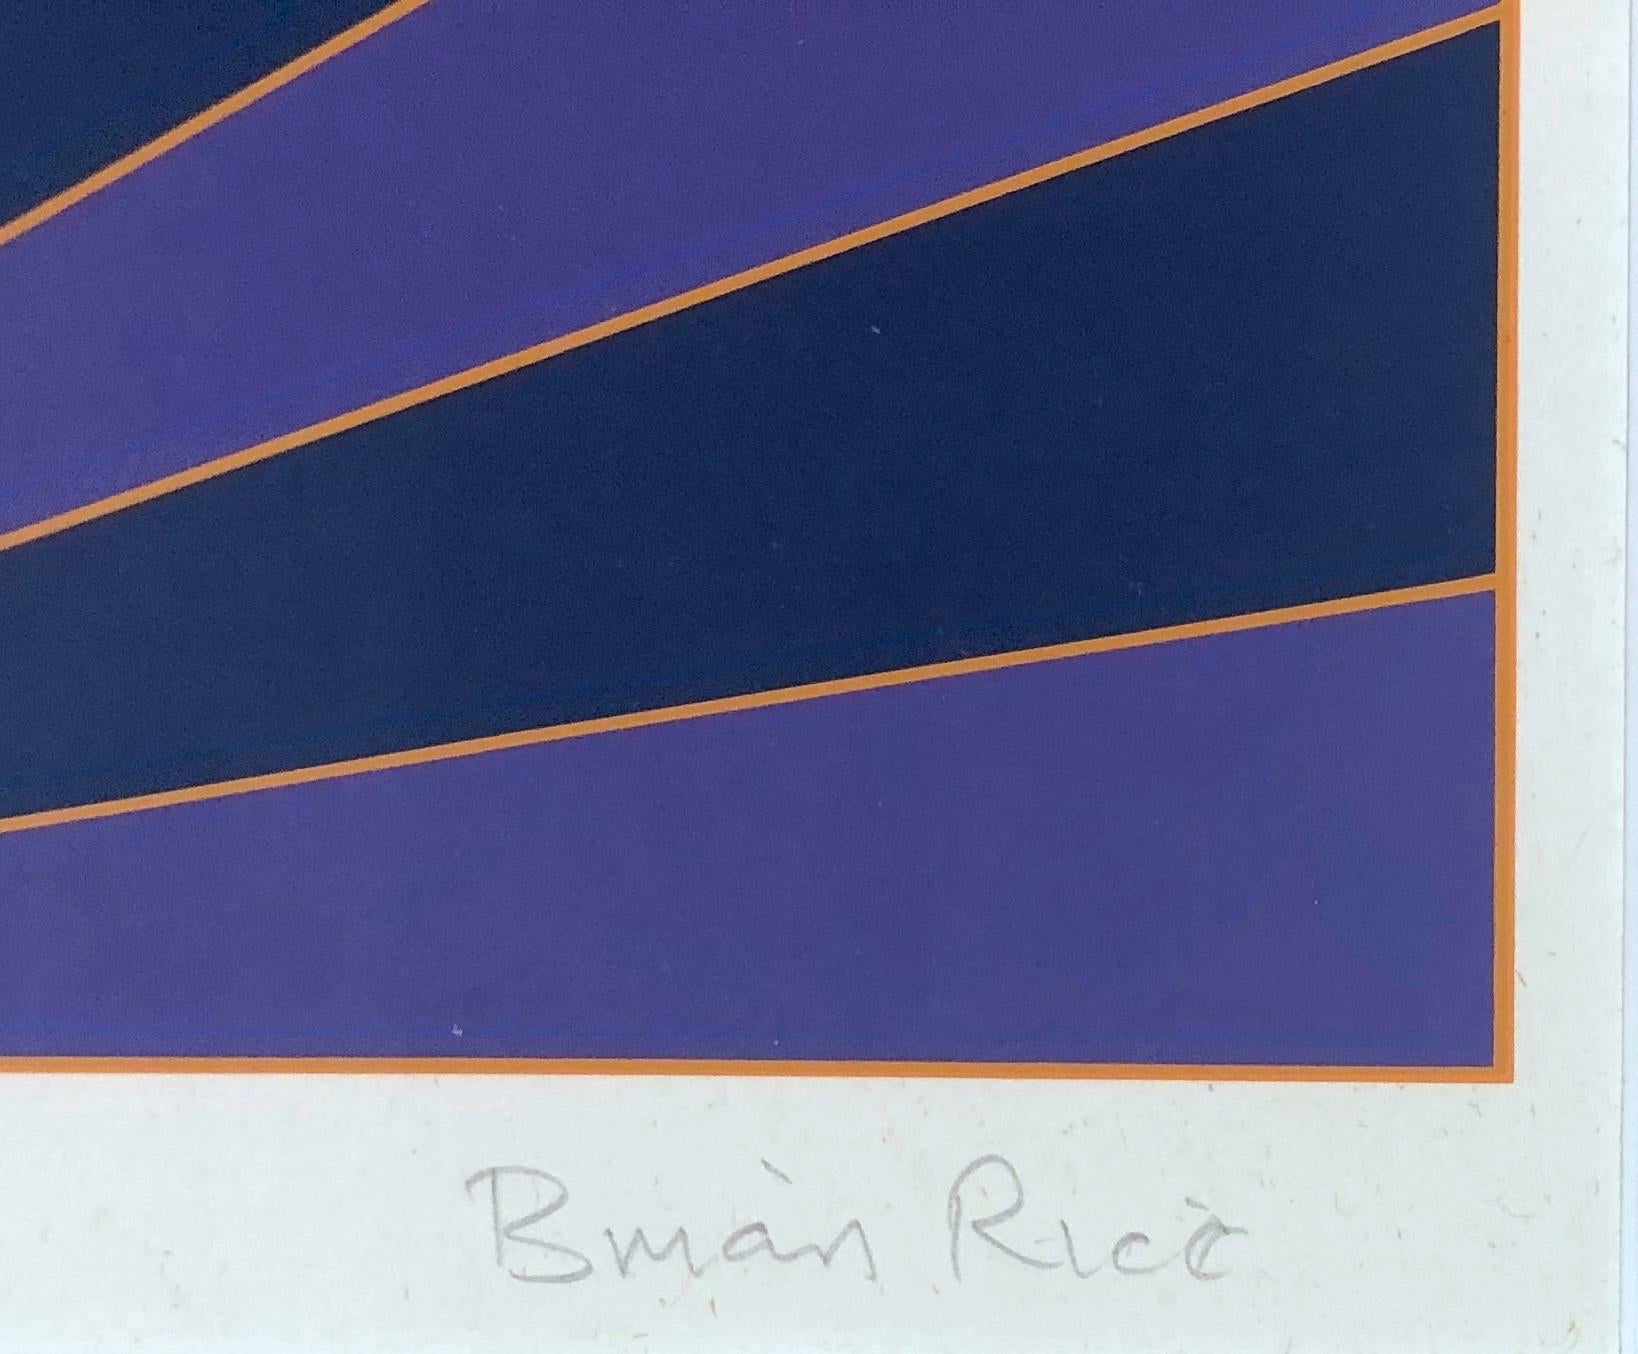 Geometric Illusion: framed abstract sunburst landscape print in purple & blue - Print by Brian Rice